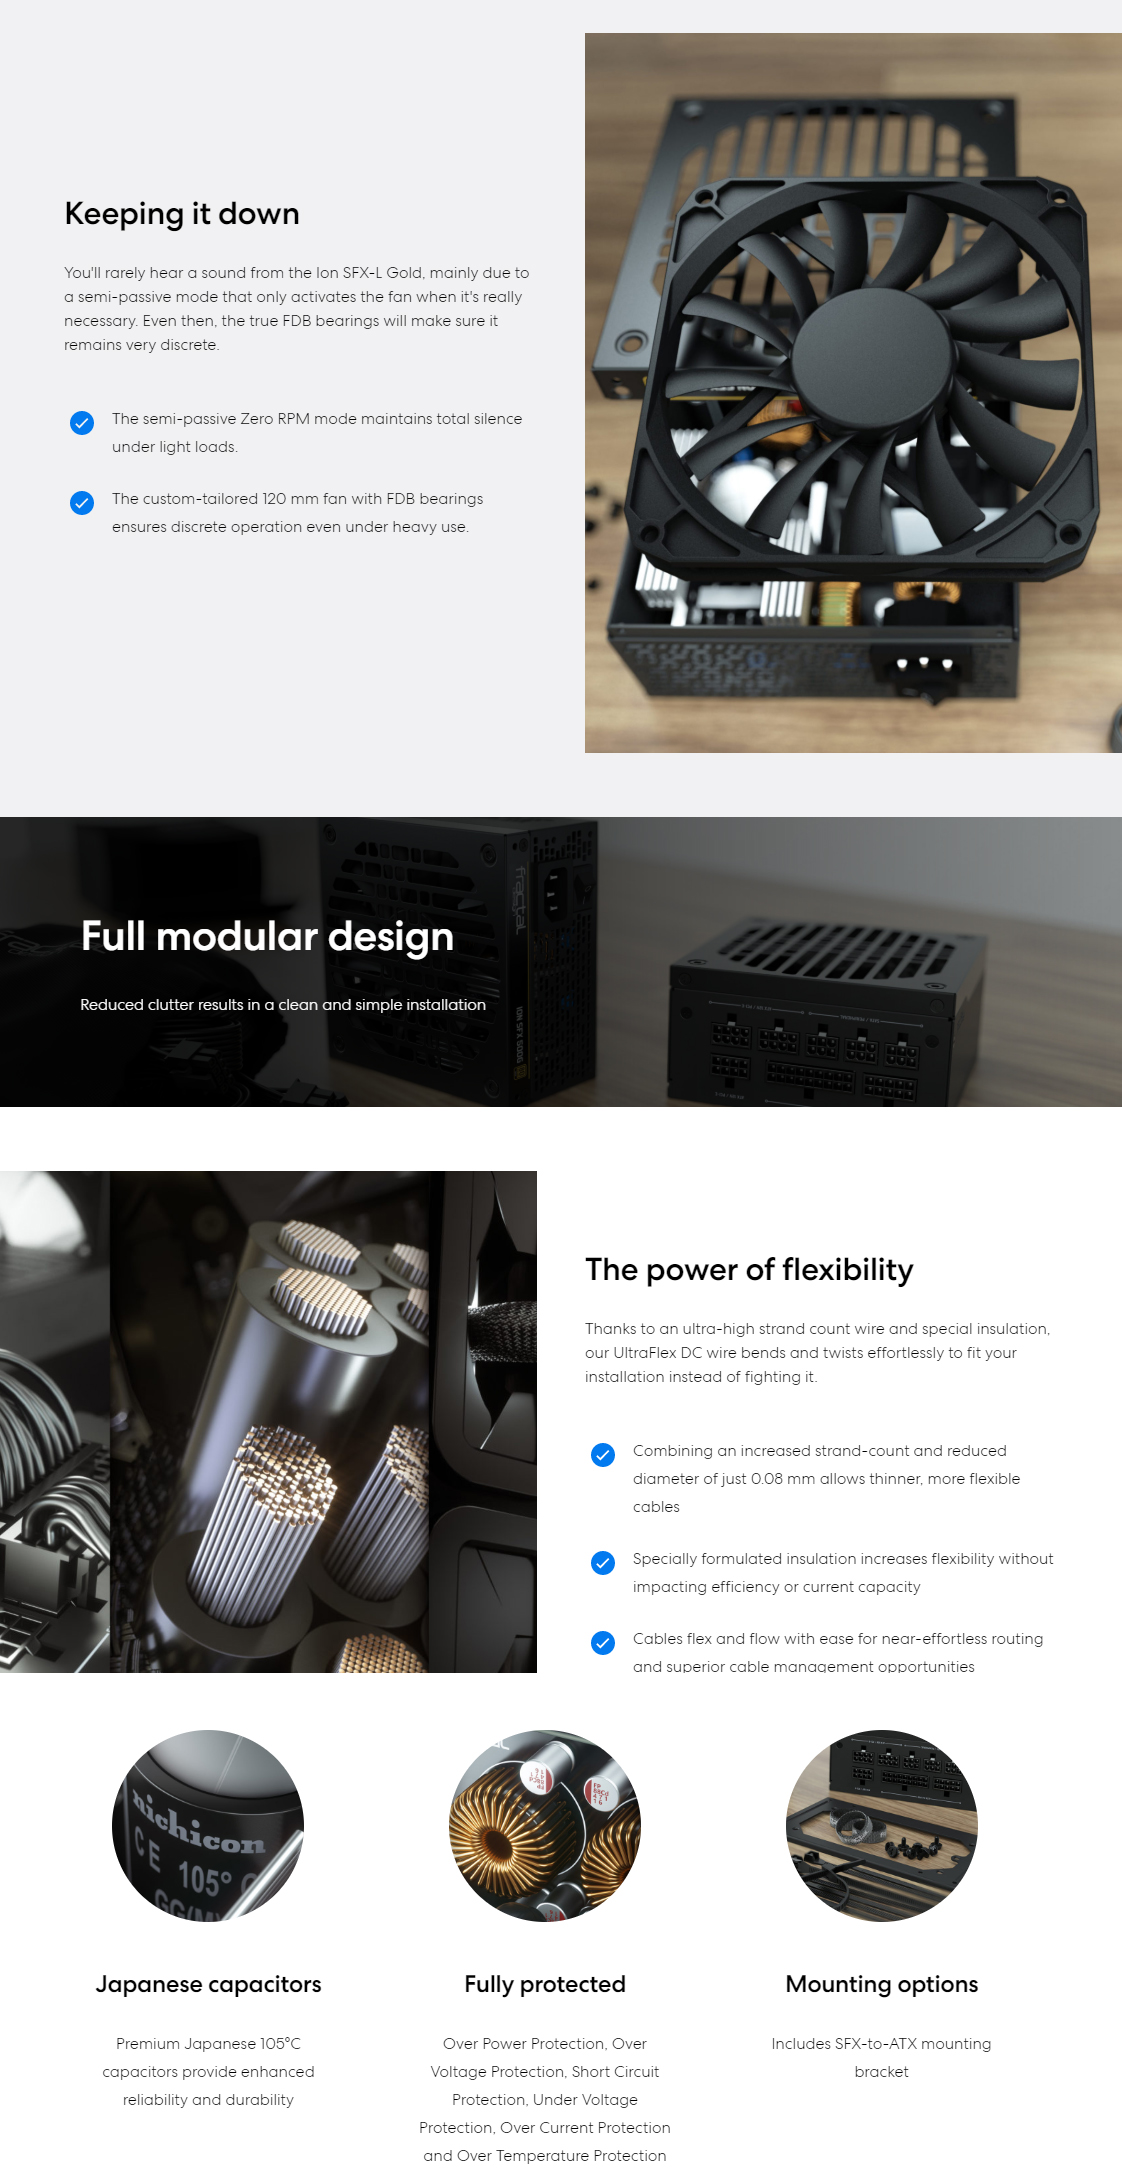 A large marketing image providing additional information about the product Fractal Design Ion 500W Gold SFX-L Modular PSU - Additional alt info not provided